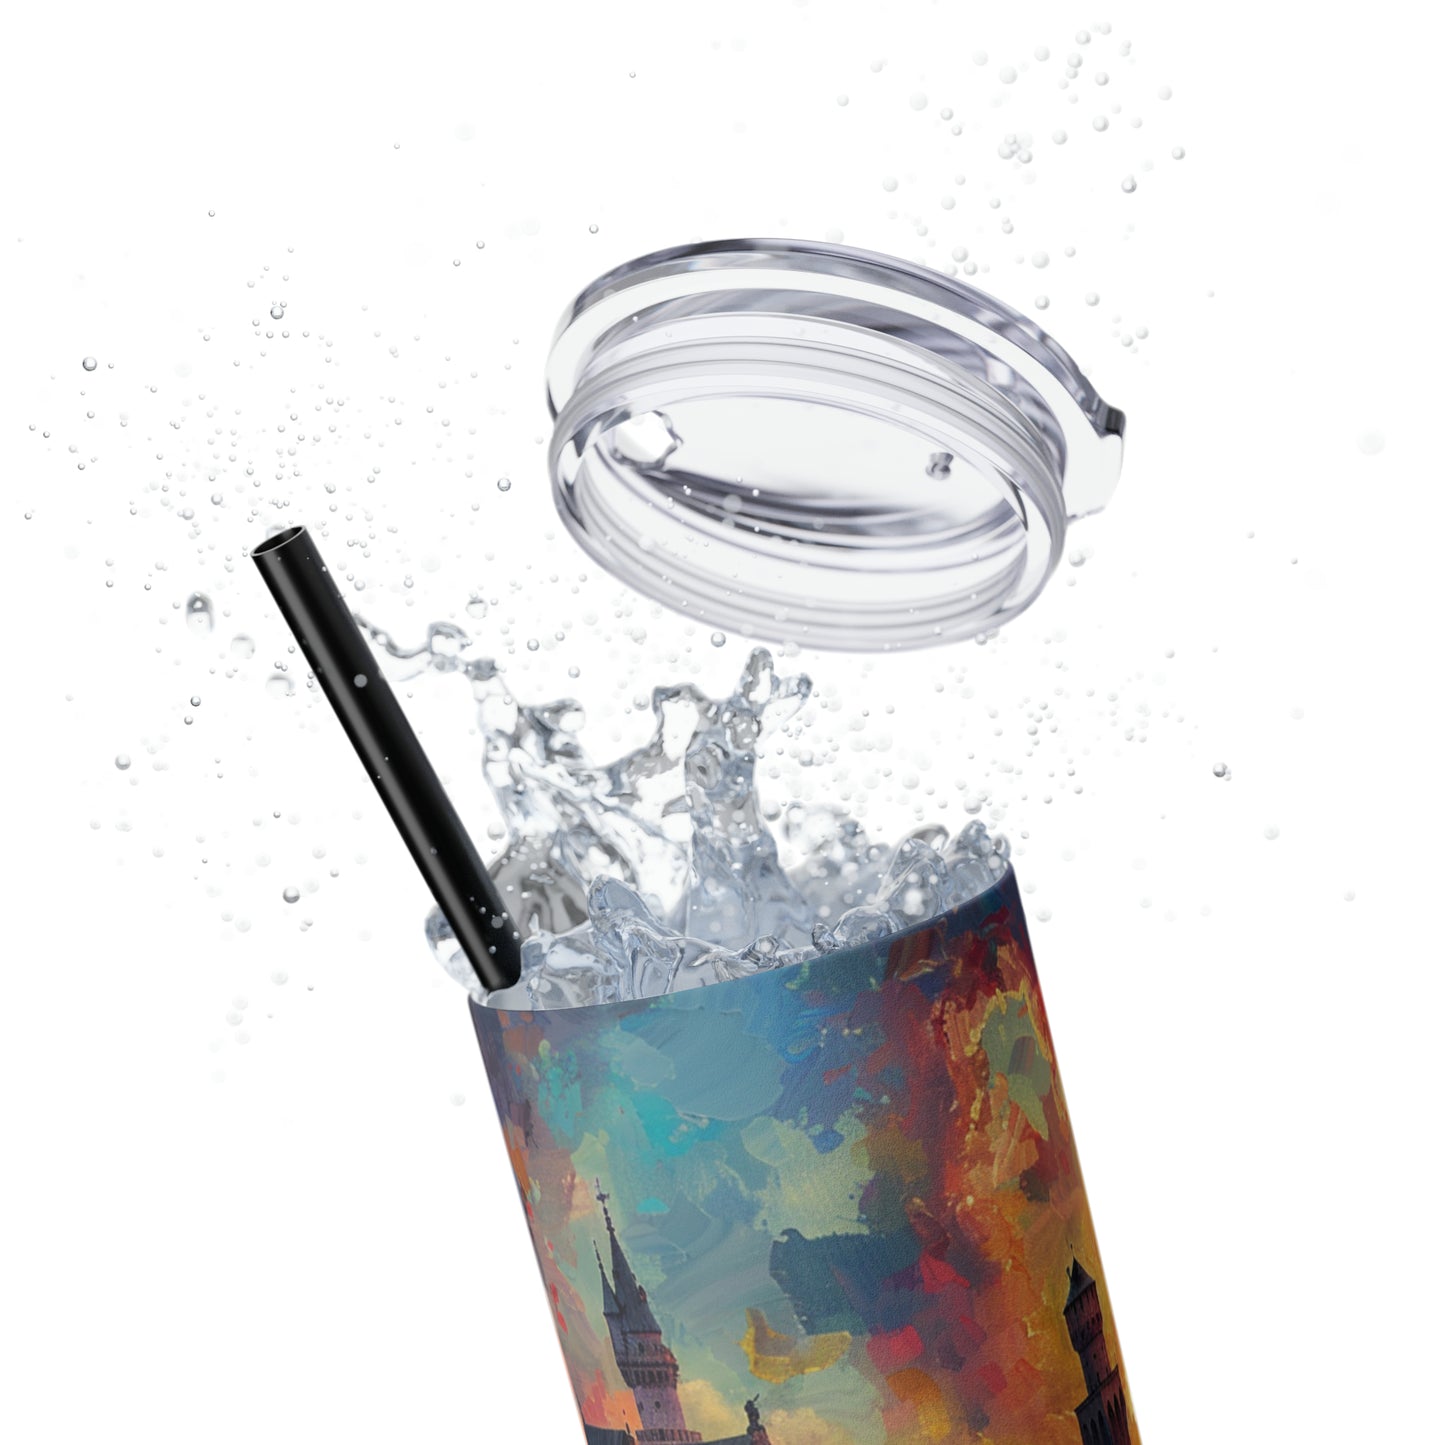 Painted Castle 20oz Stainless Steel Skinny Tumbler with Lid & Straw - Dyborn Designs